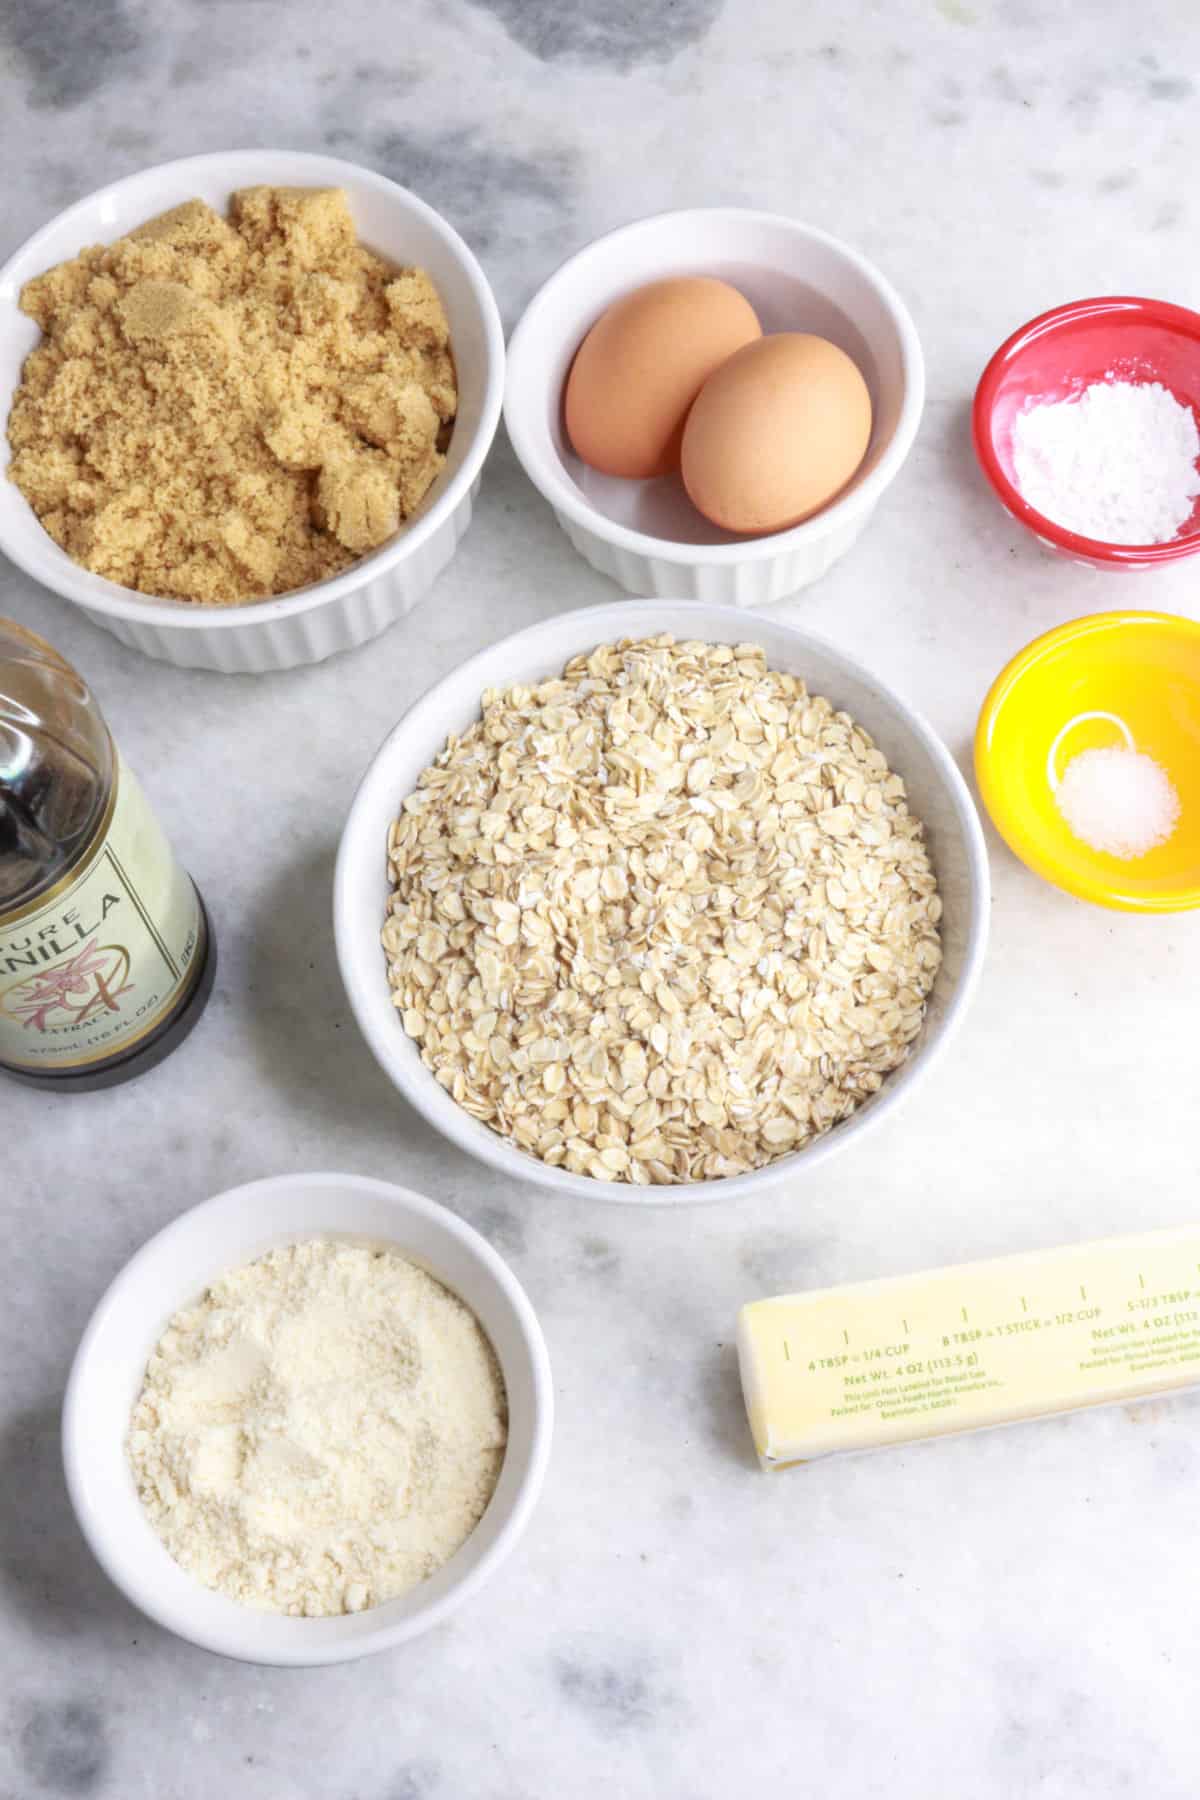 Bowl of brown sugar, 2 eggs, a pinch bowl with baking powder, another with salt, a bowl with oats, a stick of butter, a bowl with coconut flour and a bottle of vanilla extract